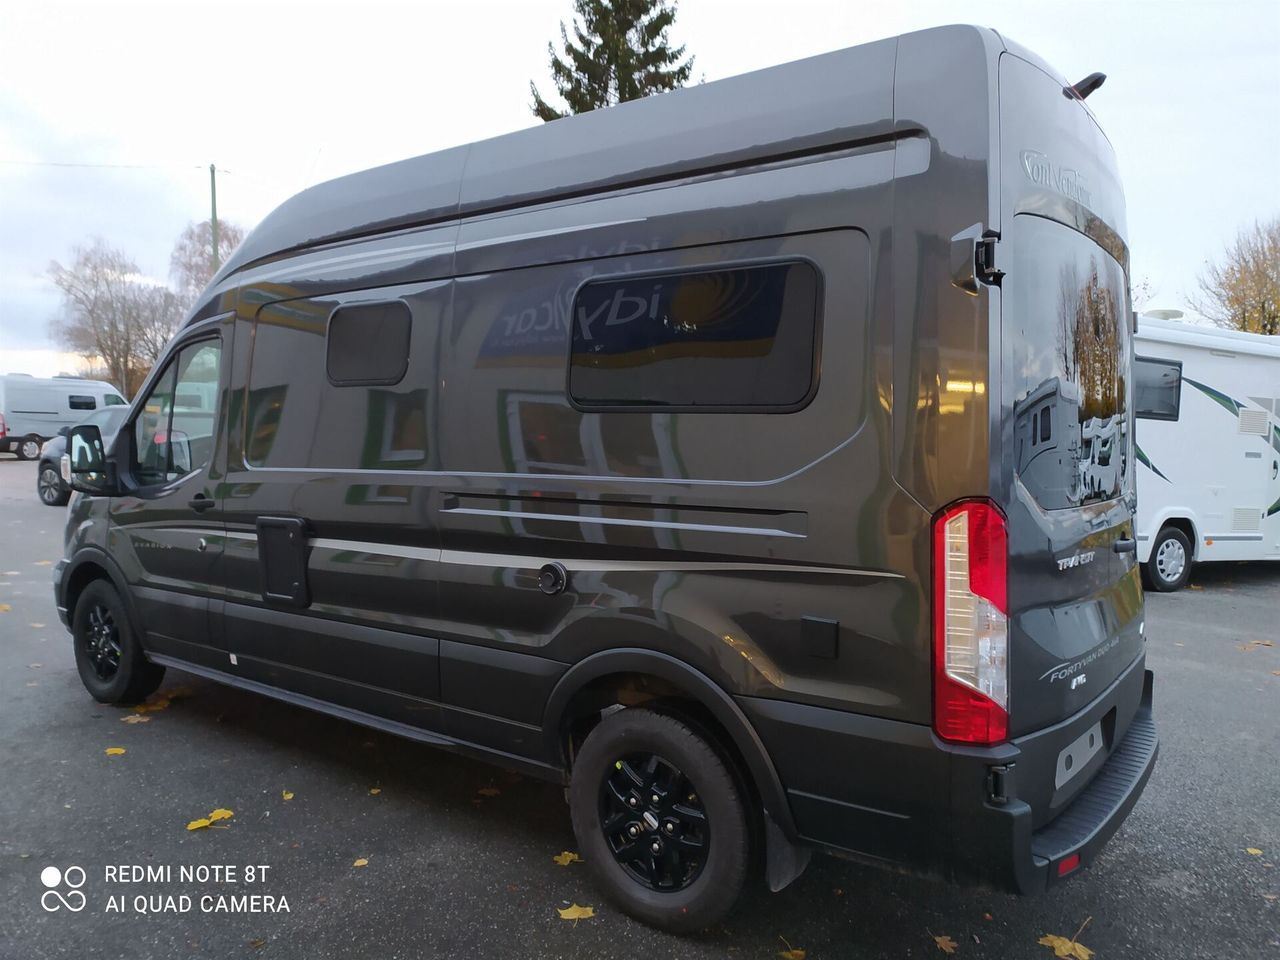 FORTY VAN DUO 4X4 170CH PROMO EXCEPTIONNEL